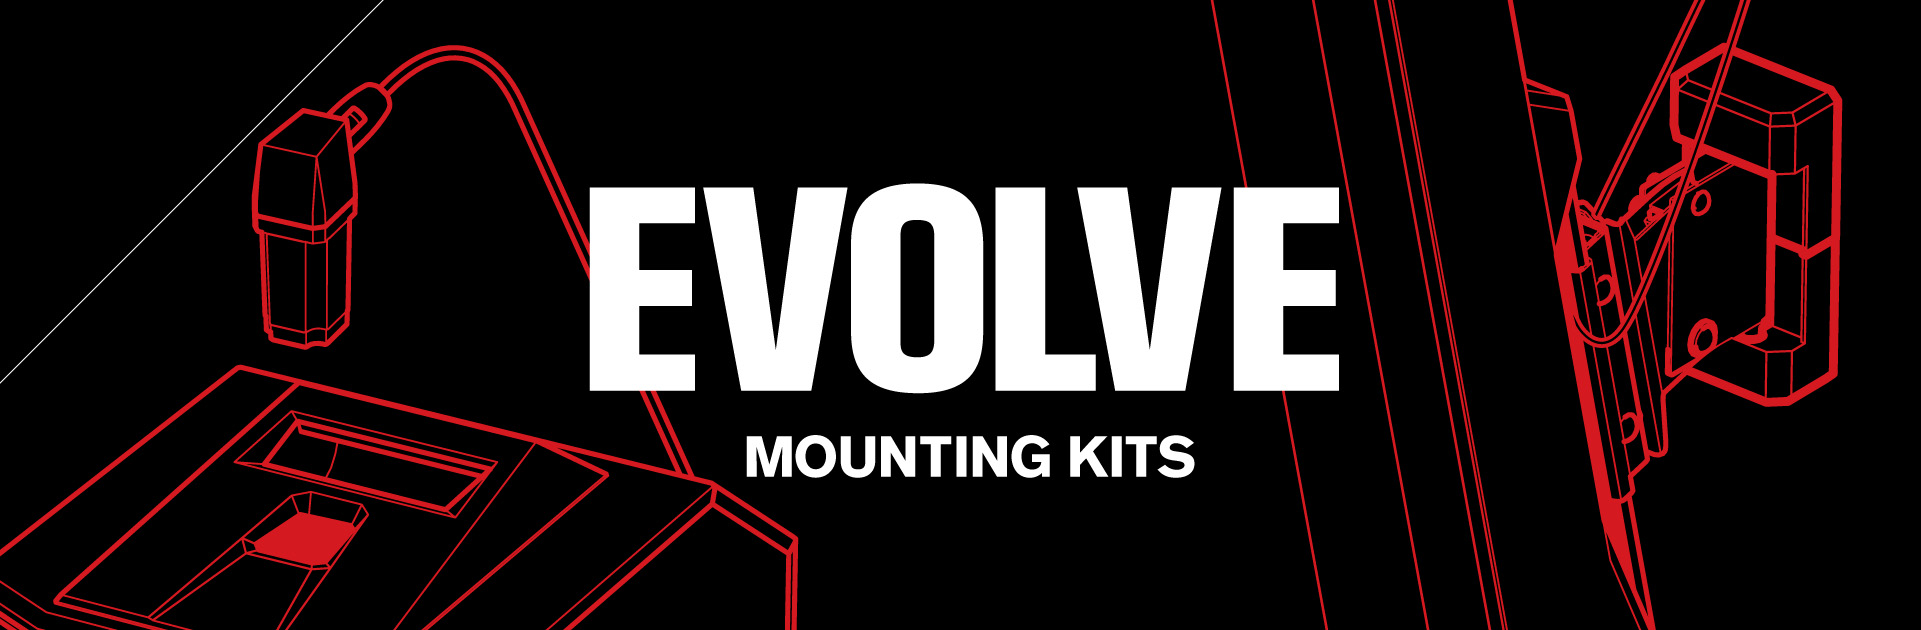 MOUNTING OPTIONS FOR EVOLVE COLUMN SYSTEMS SERIES